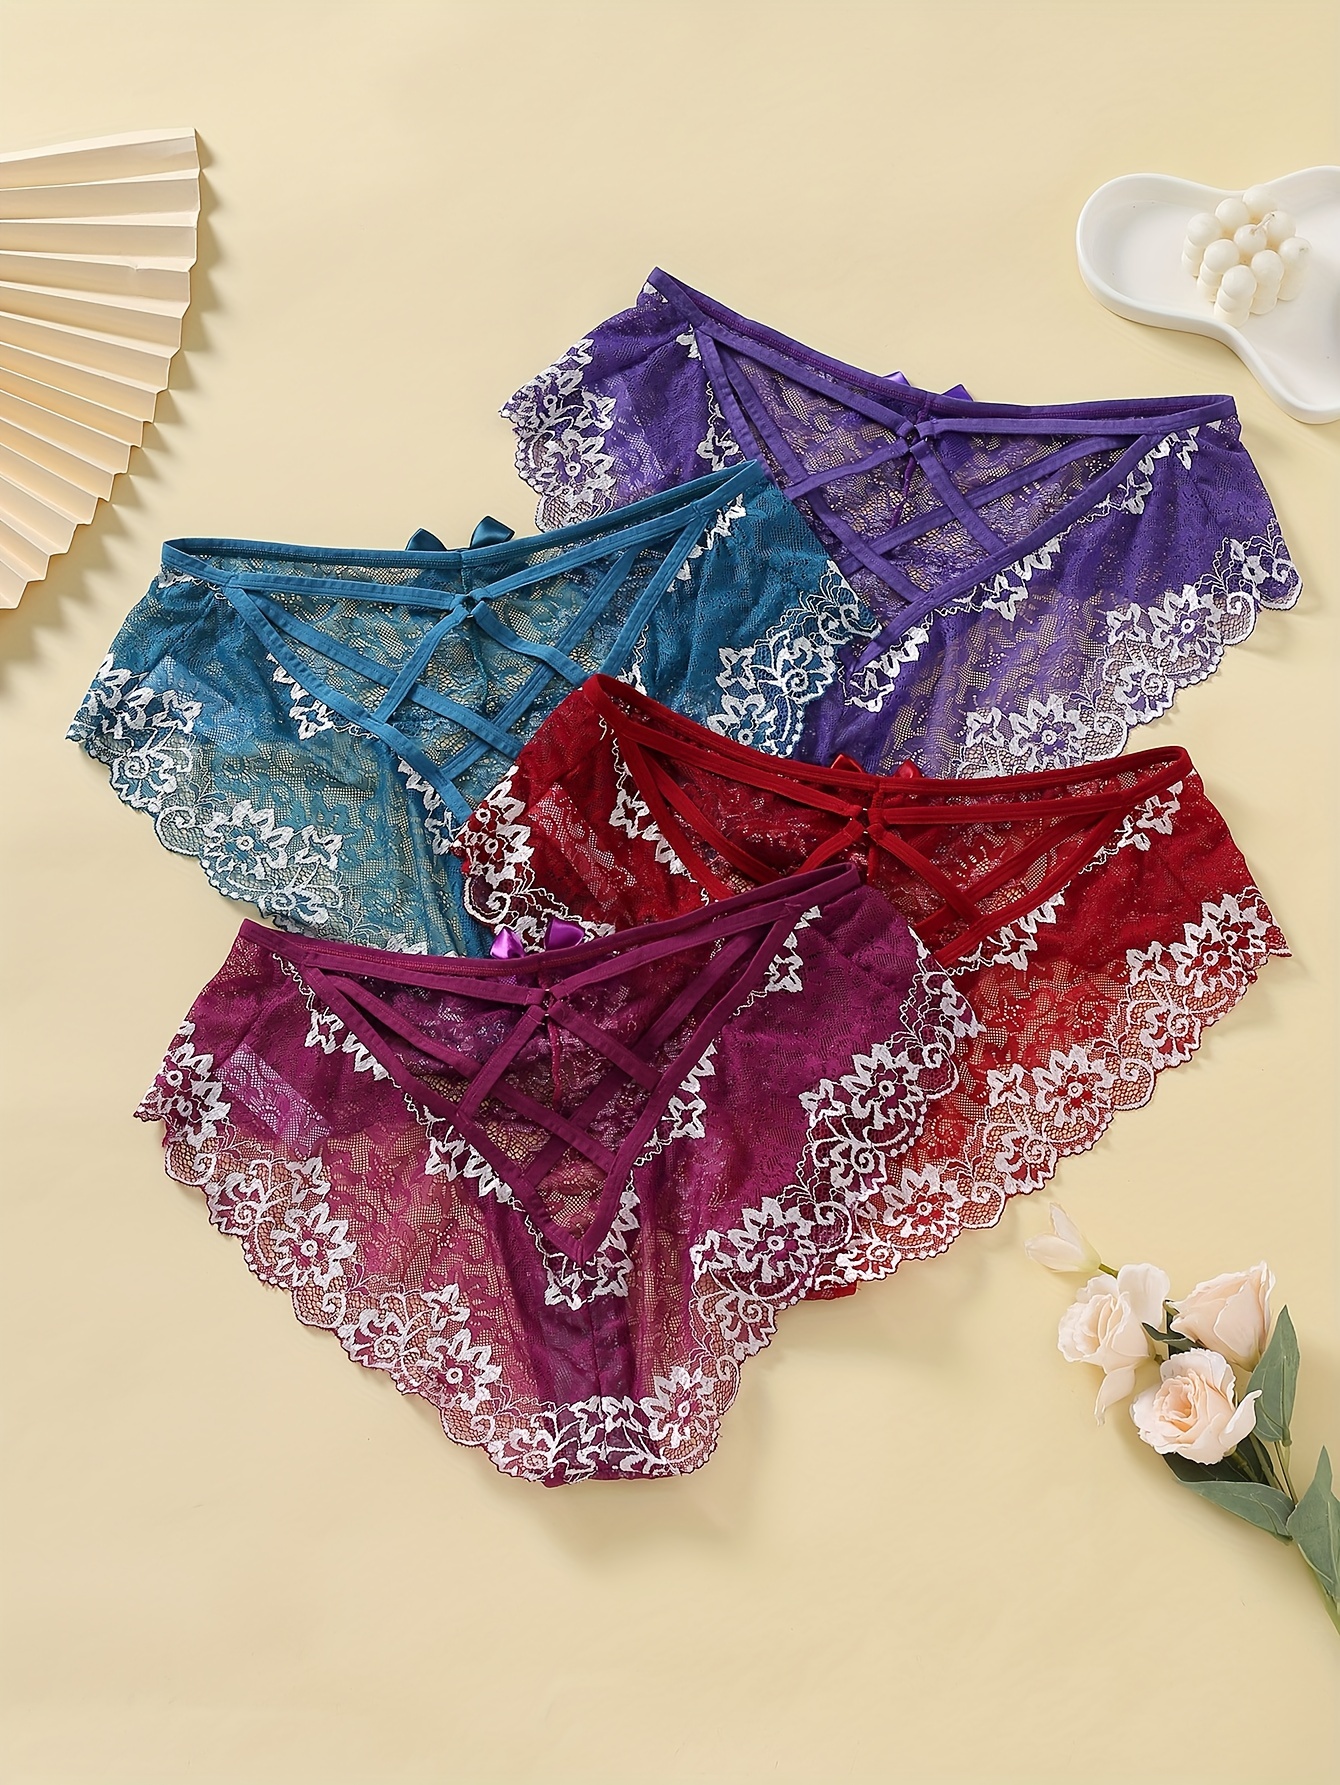 Women Sexy Lace Floral Briefs Female Bow Cross String Panties